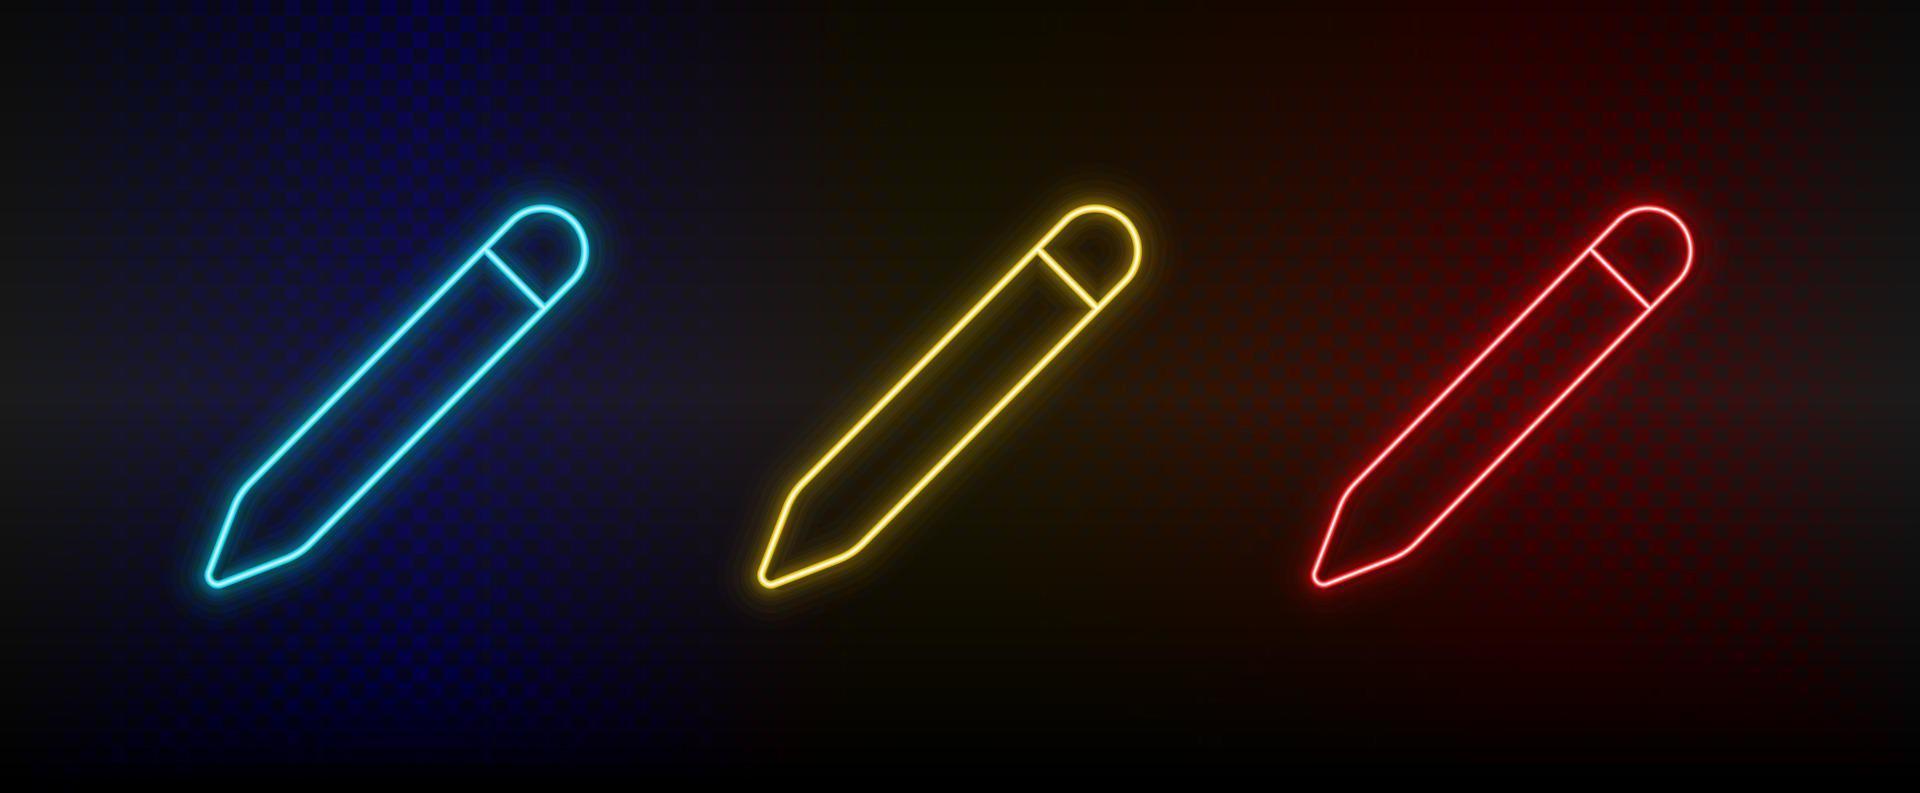 Neon icons, pencil. Set of red, blue, yellow neon vector icon on darken transparent background